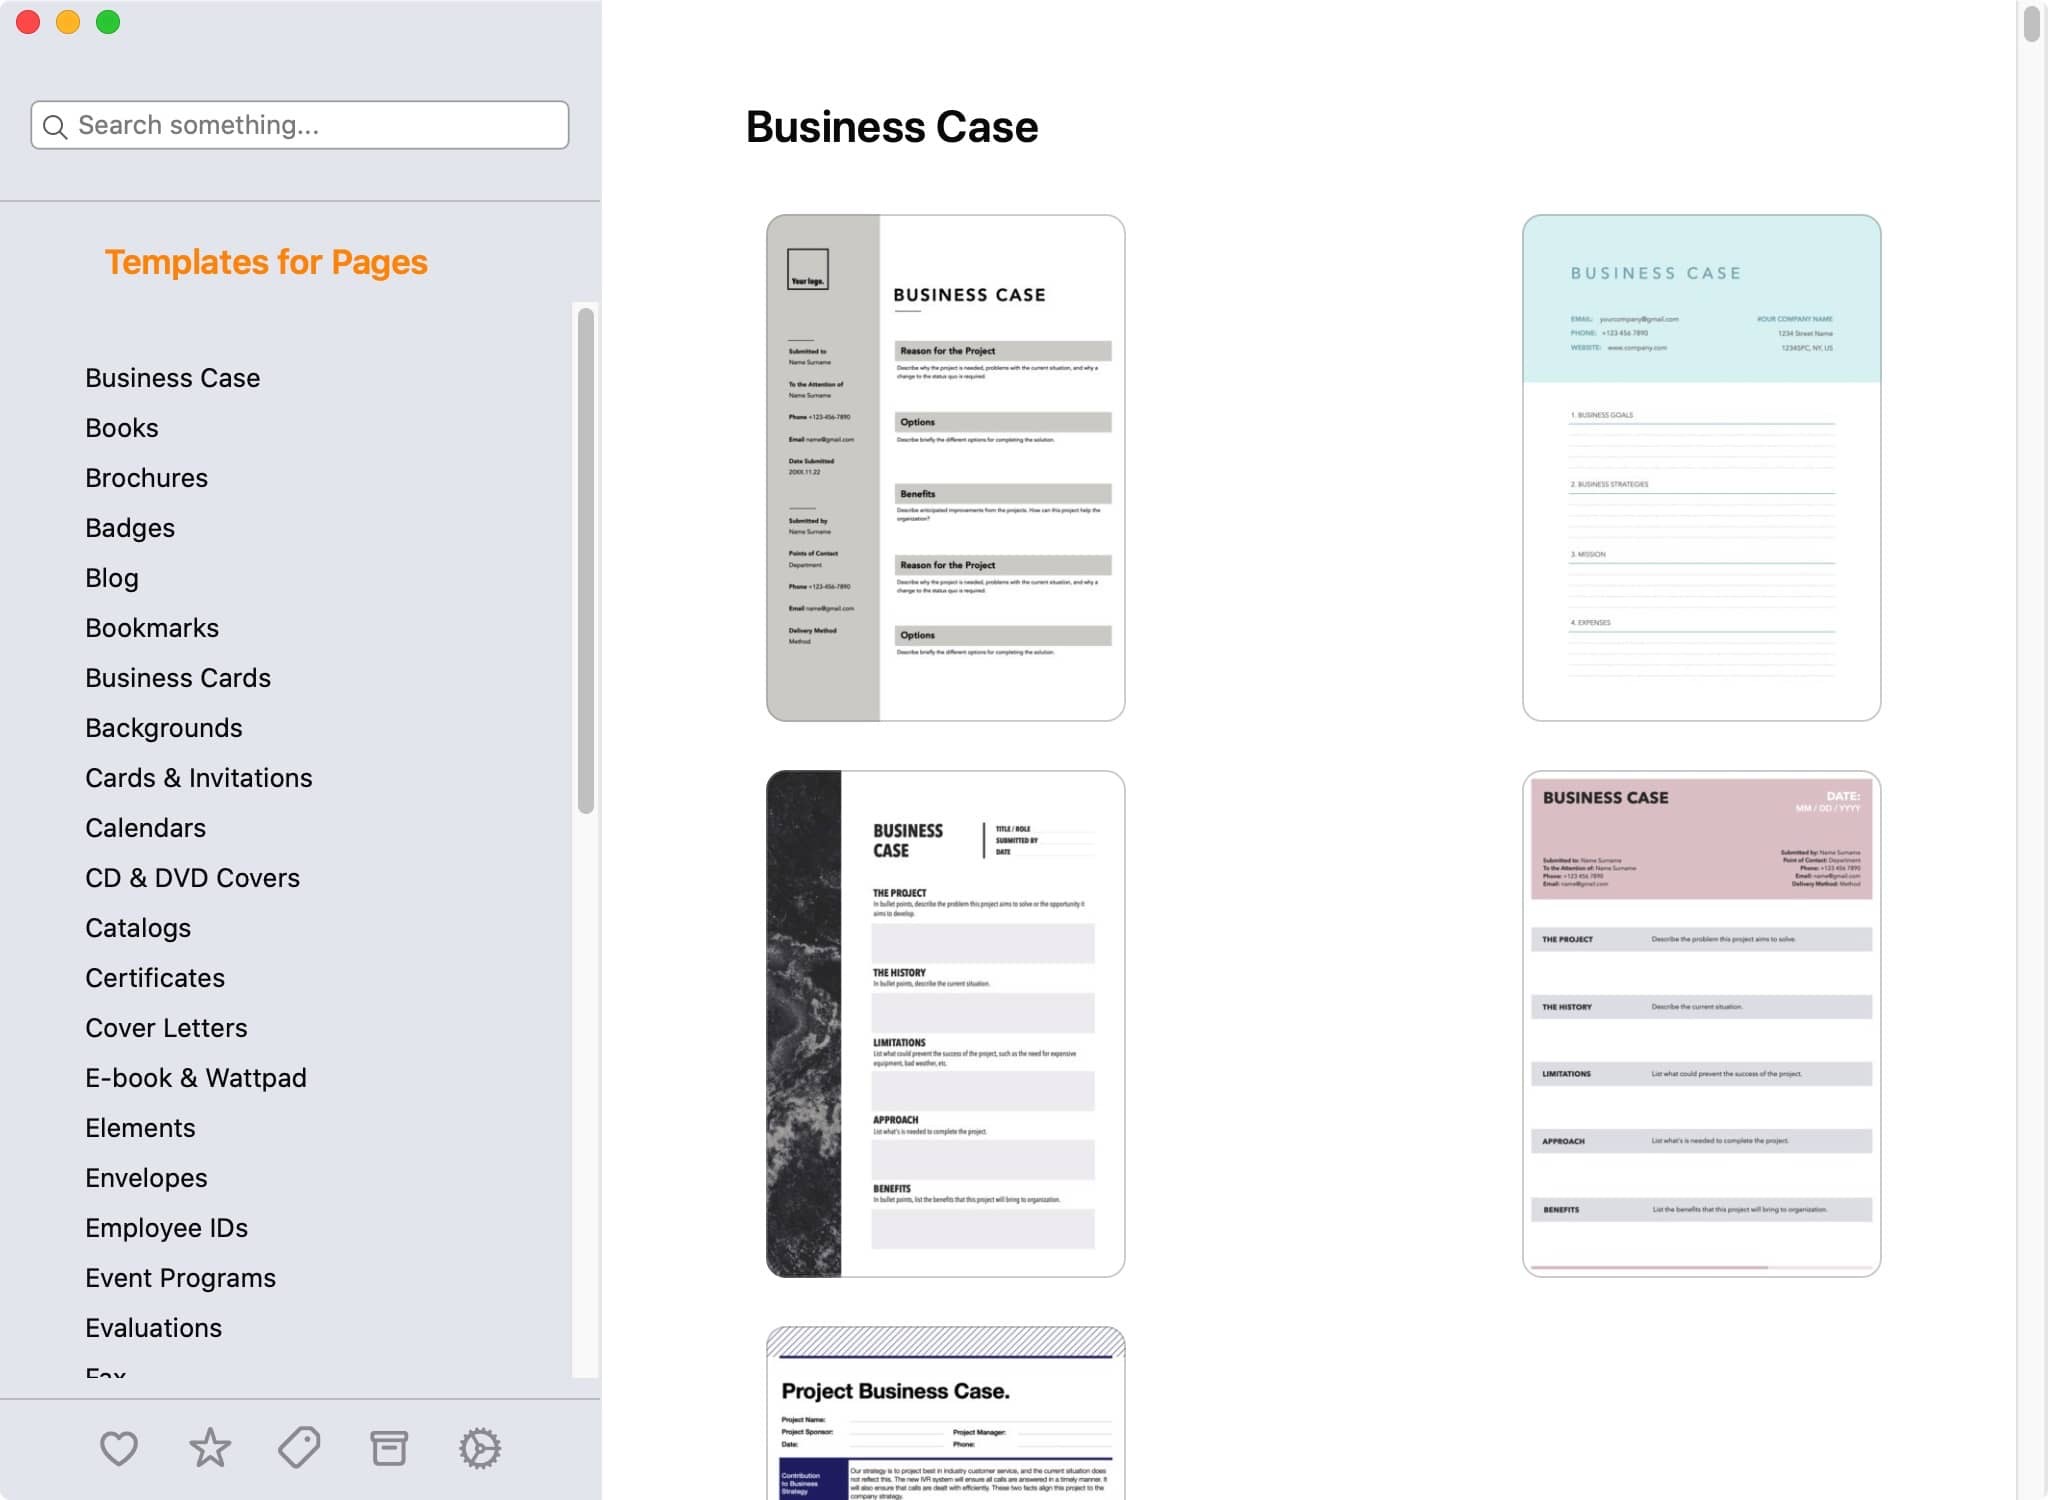 Templates for Pages 7.3 pagesģȫ_վ